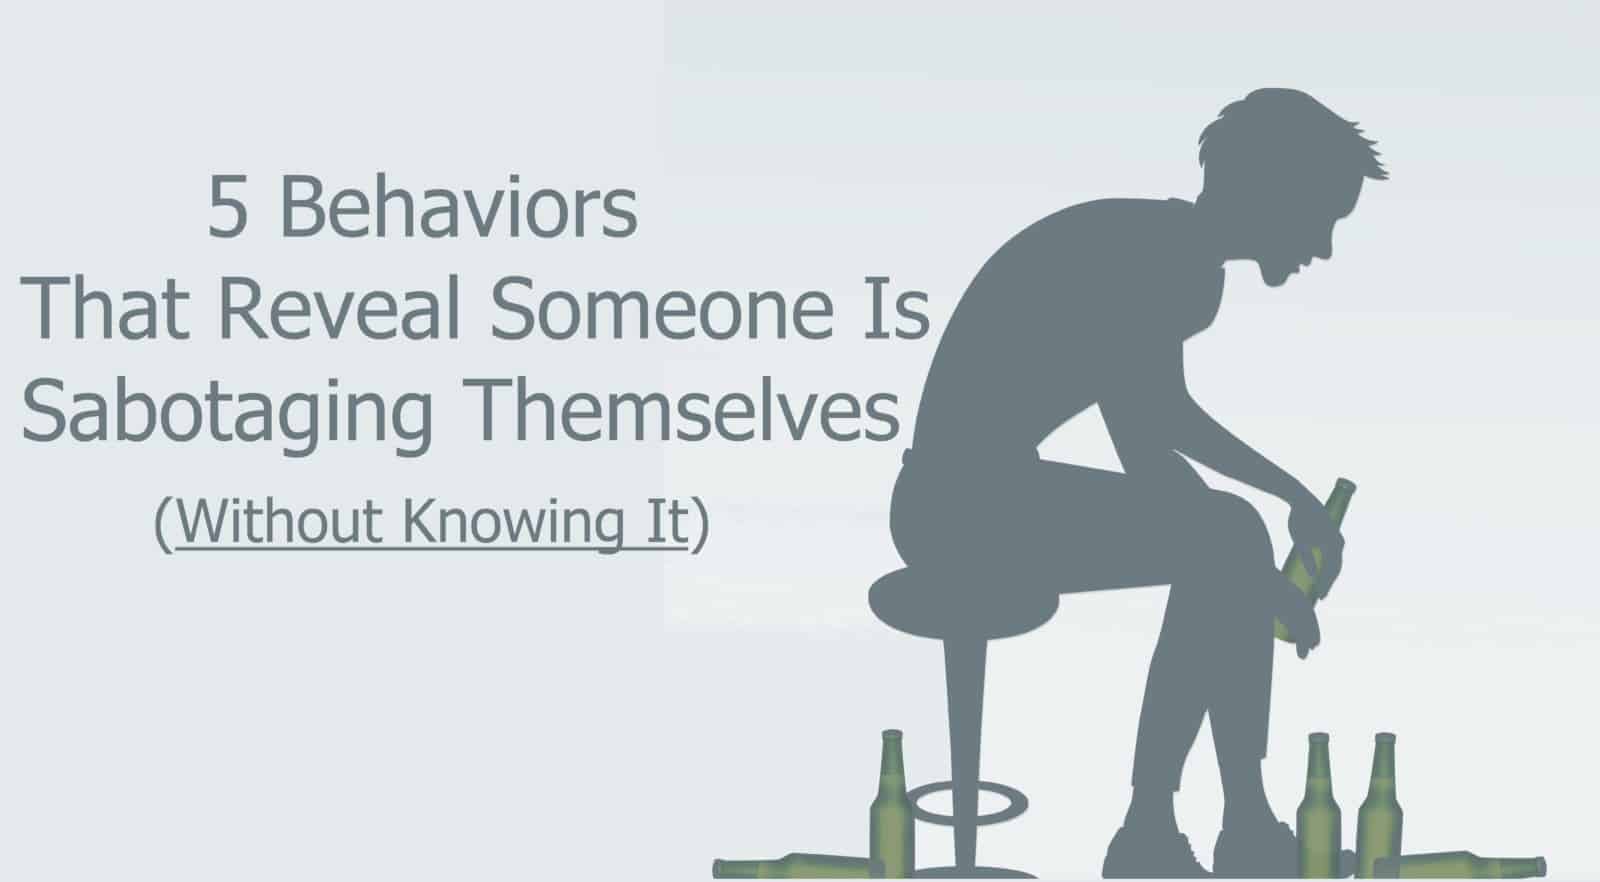 5 Behaviors That Reveal Someone Is Sabotaging Themselves (Without Knowing It)